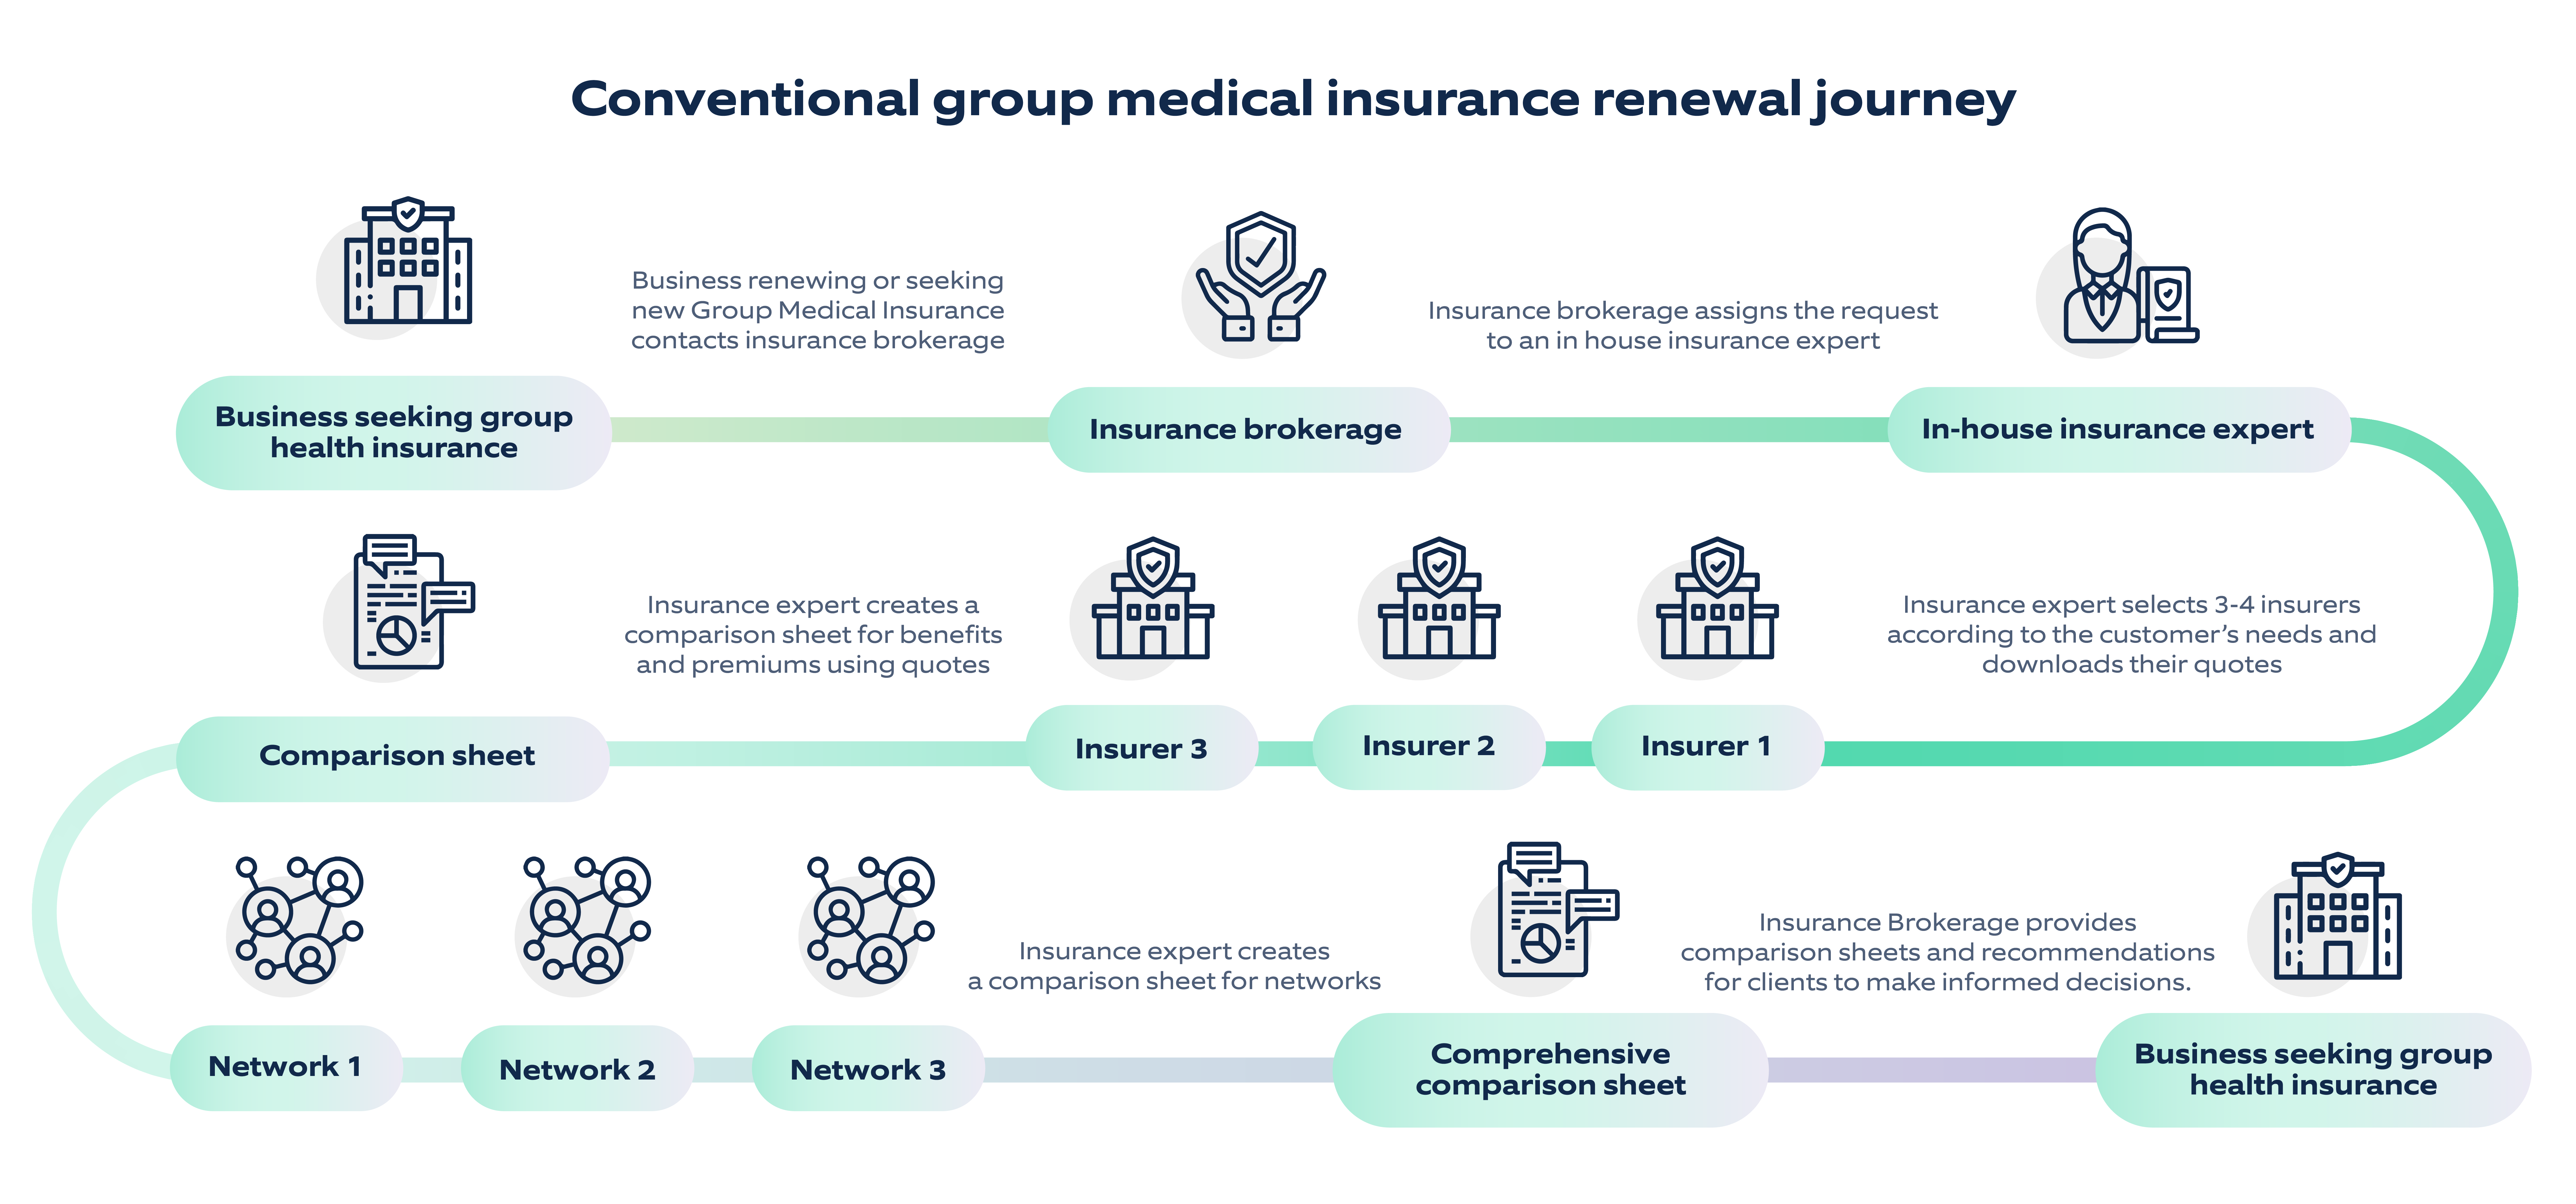 Conventional group medical insurance renewal journey